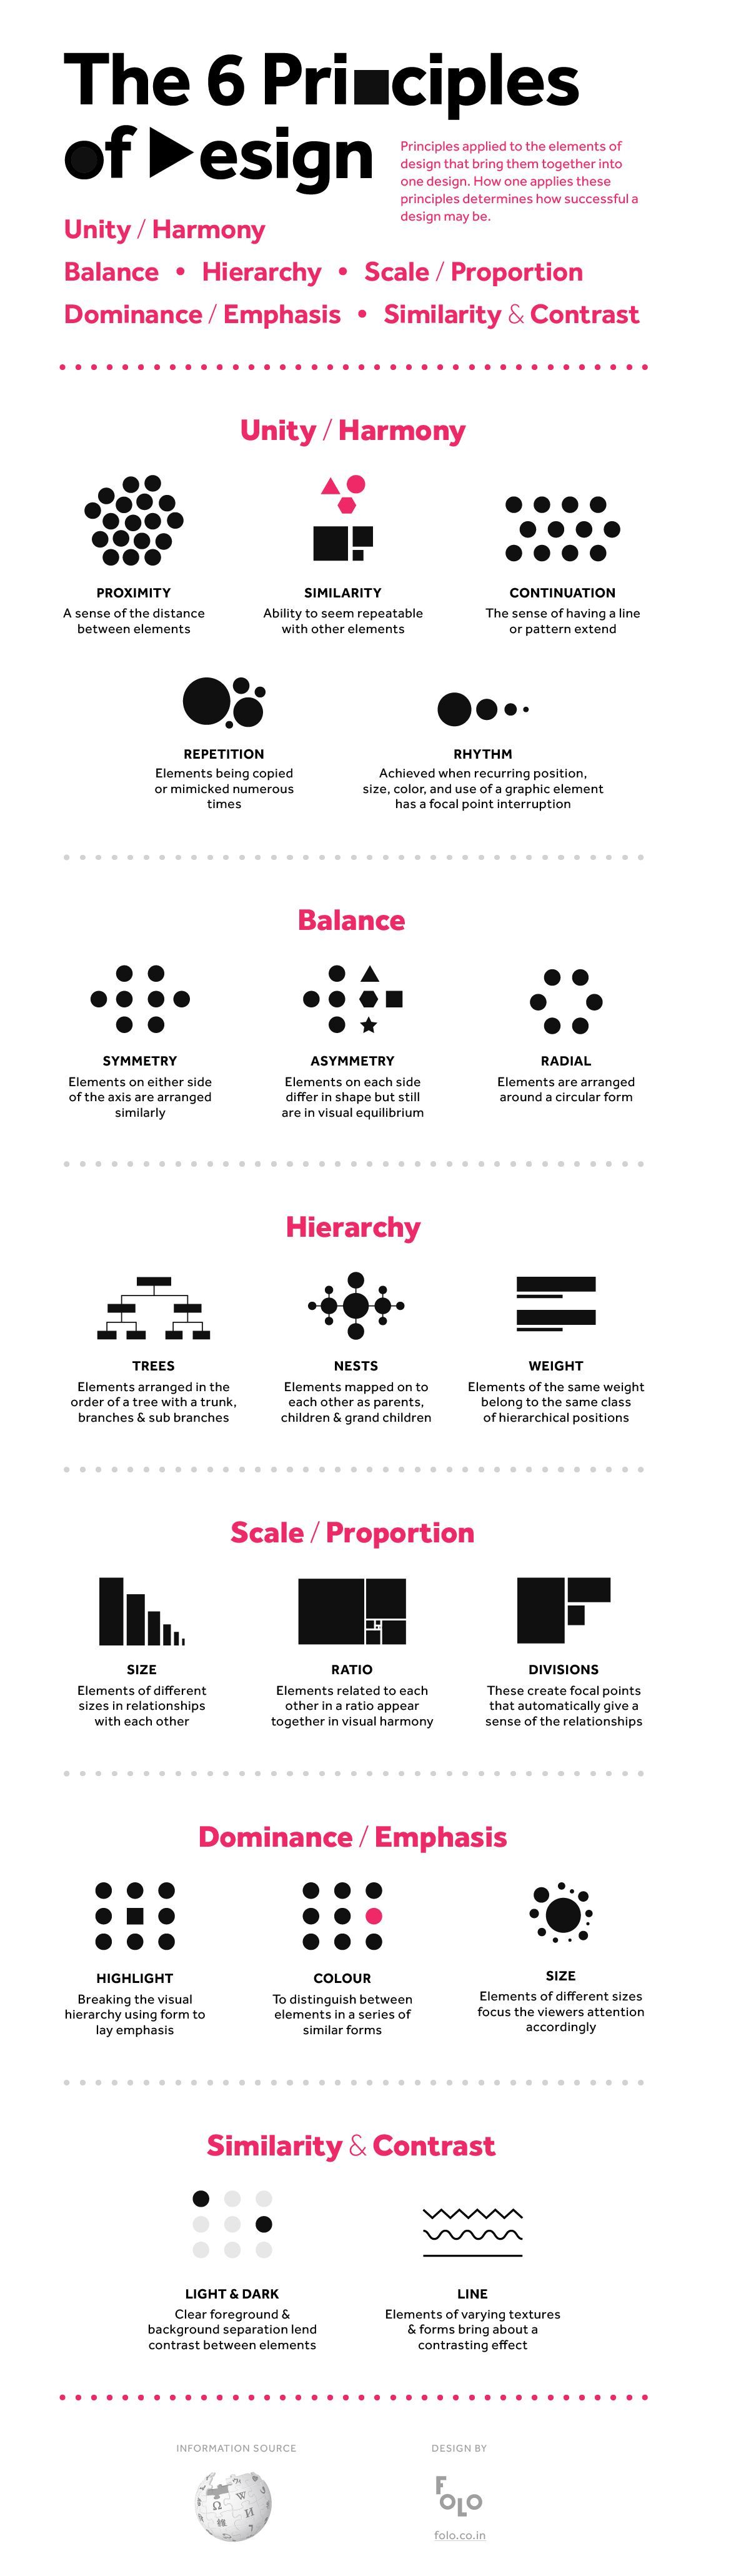 The 6 Principles of Design infographic. Some of these, like the unity/harmony ones, draw on gestalt visual